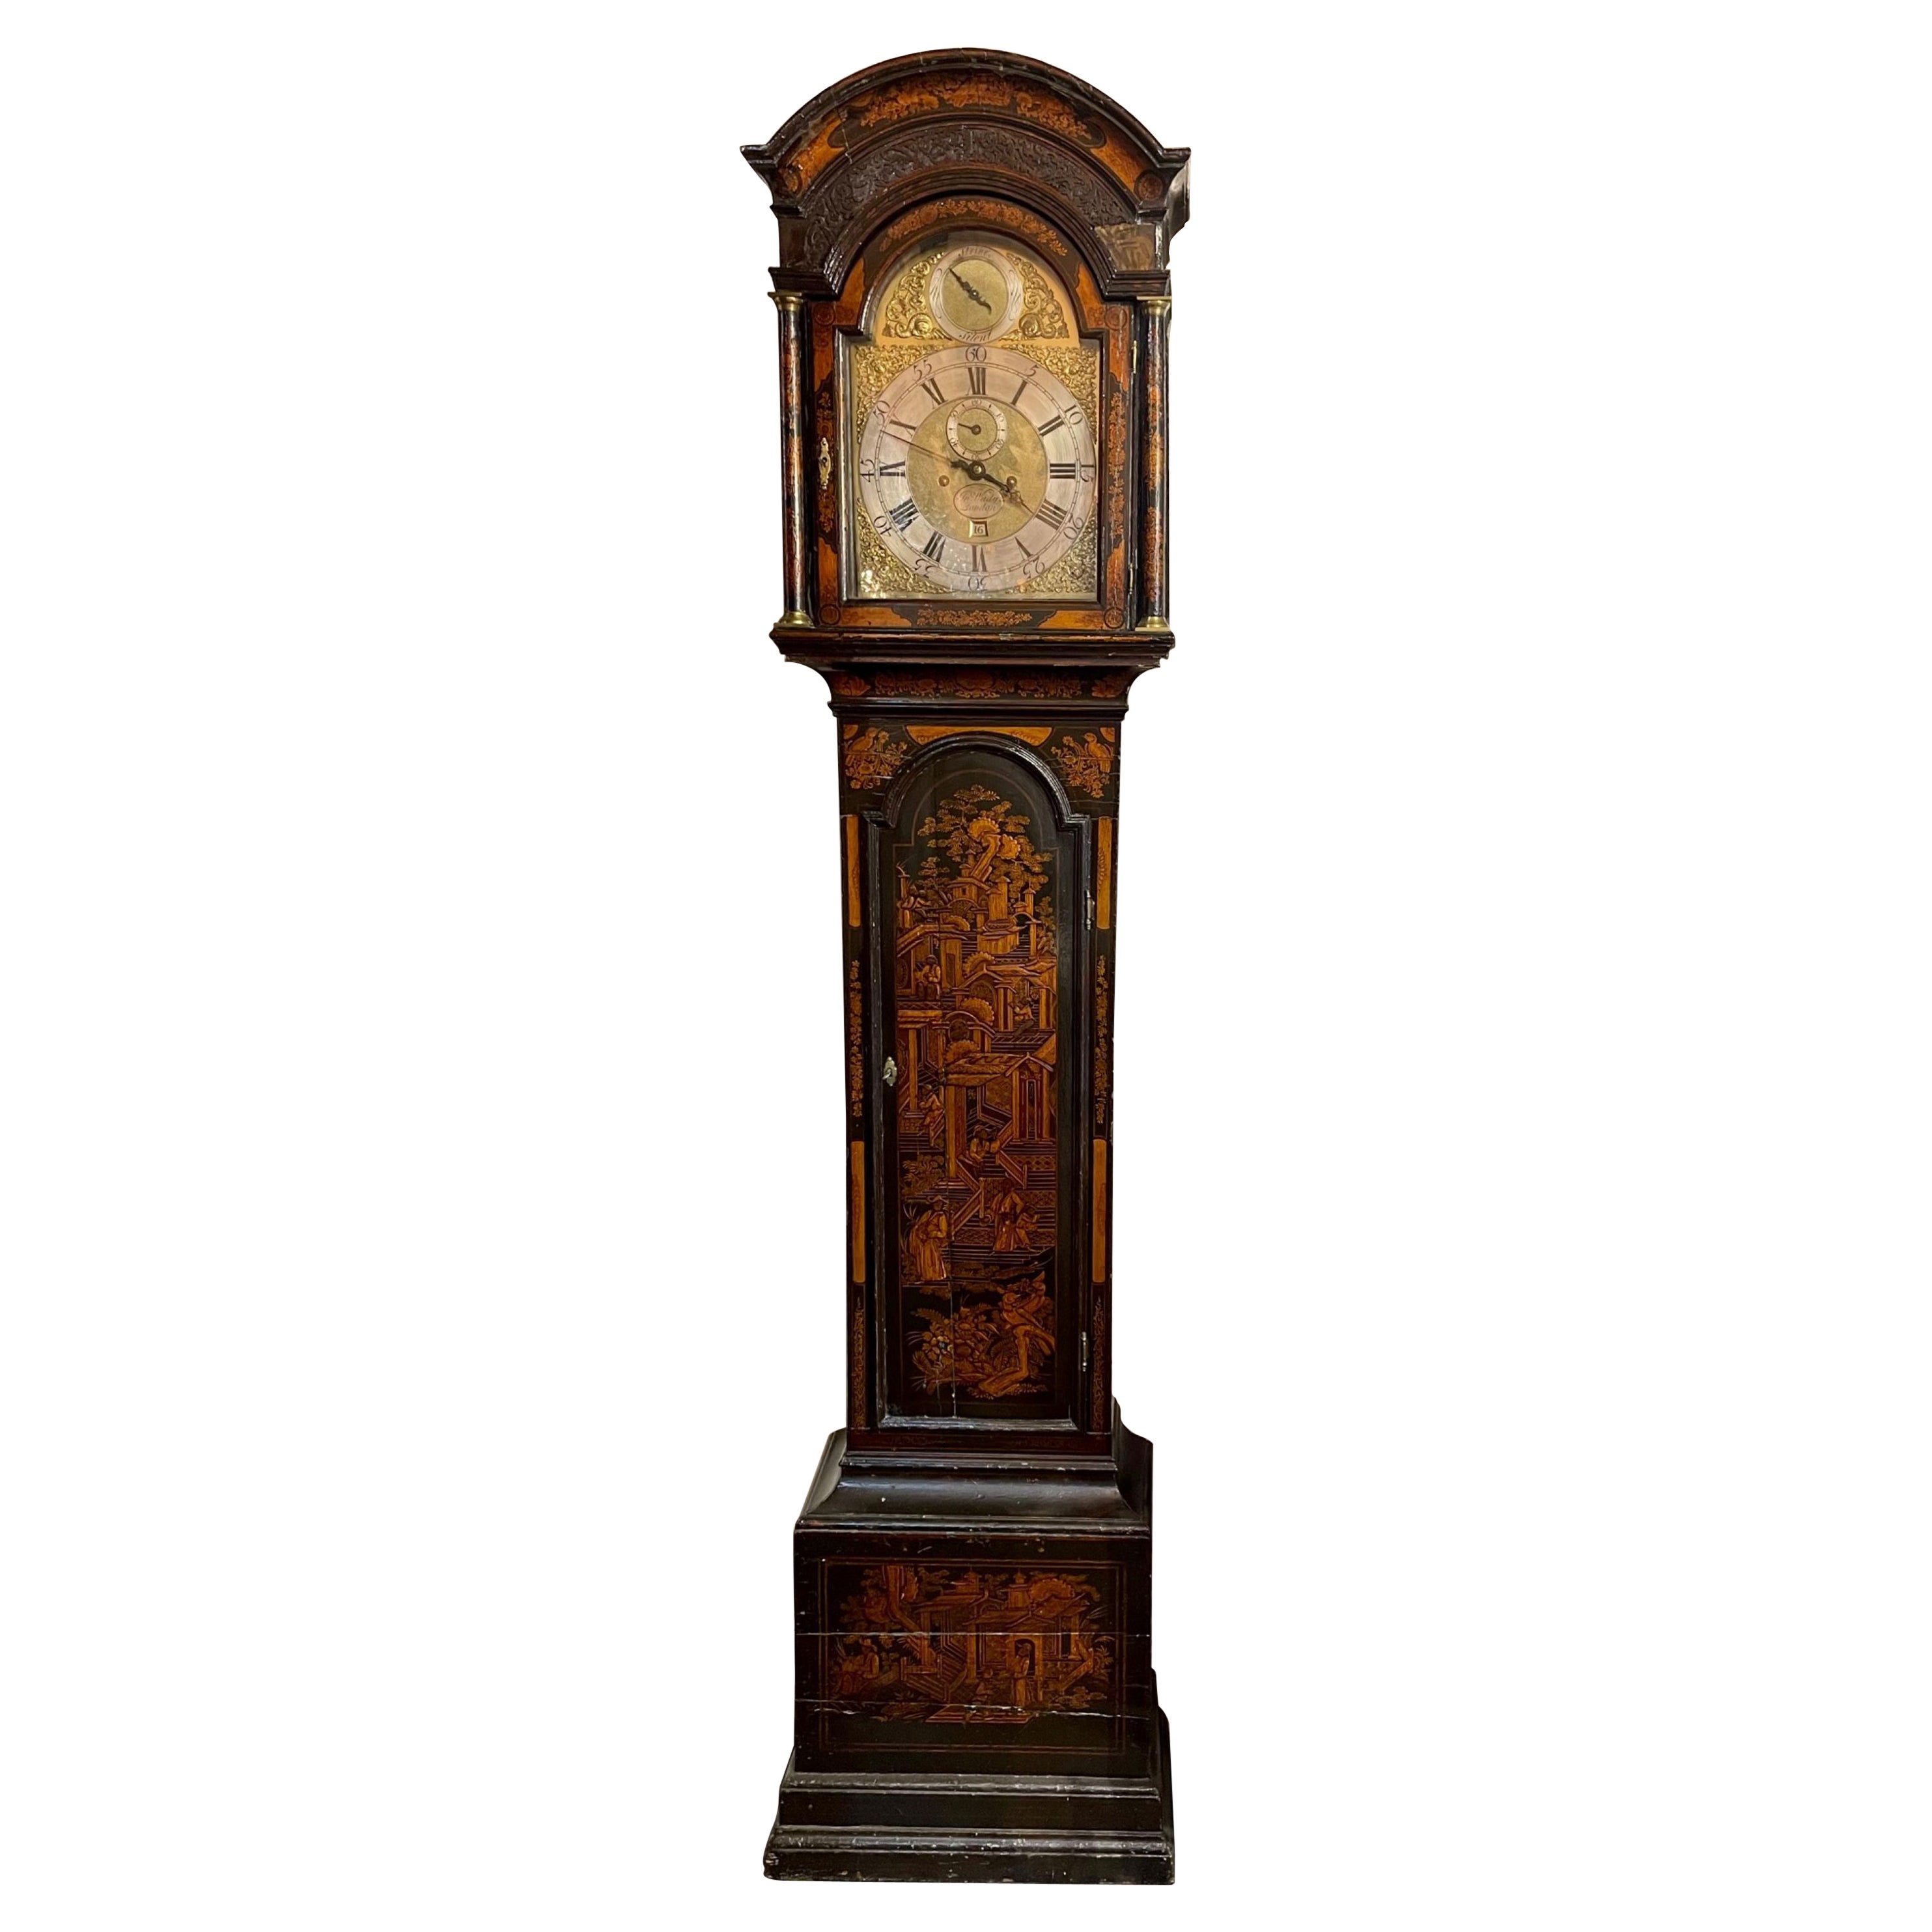 19th Century English Chinoiserie Decorated Tall Case Clock